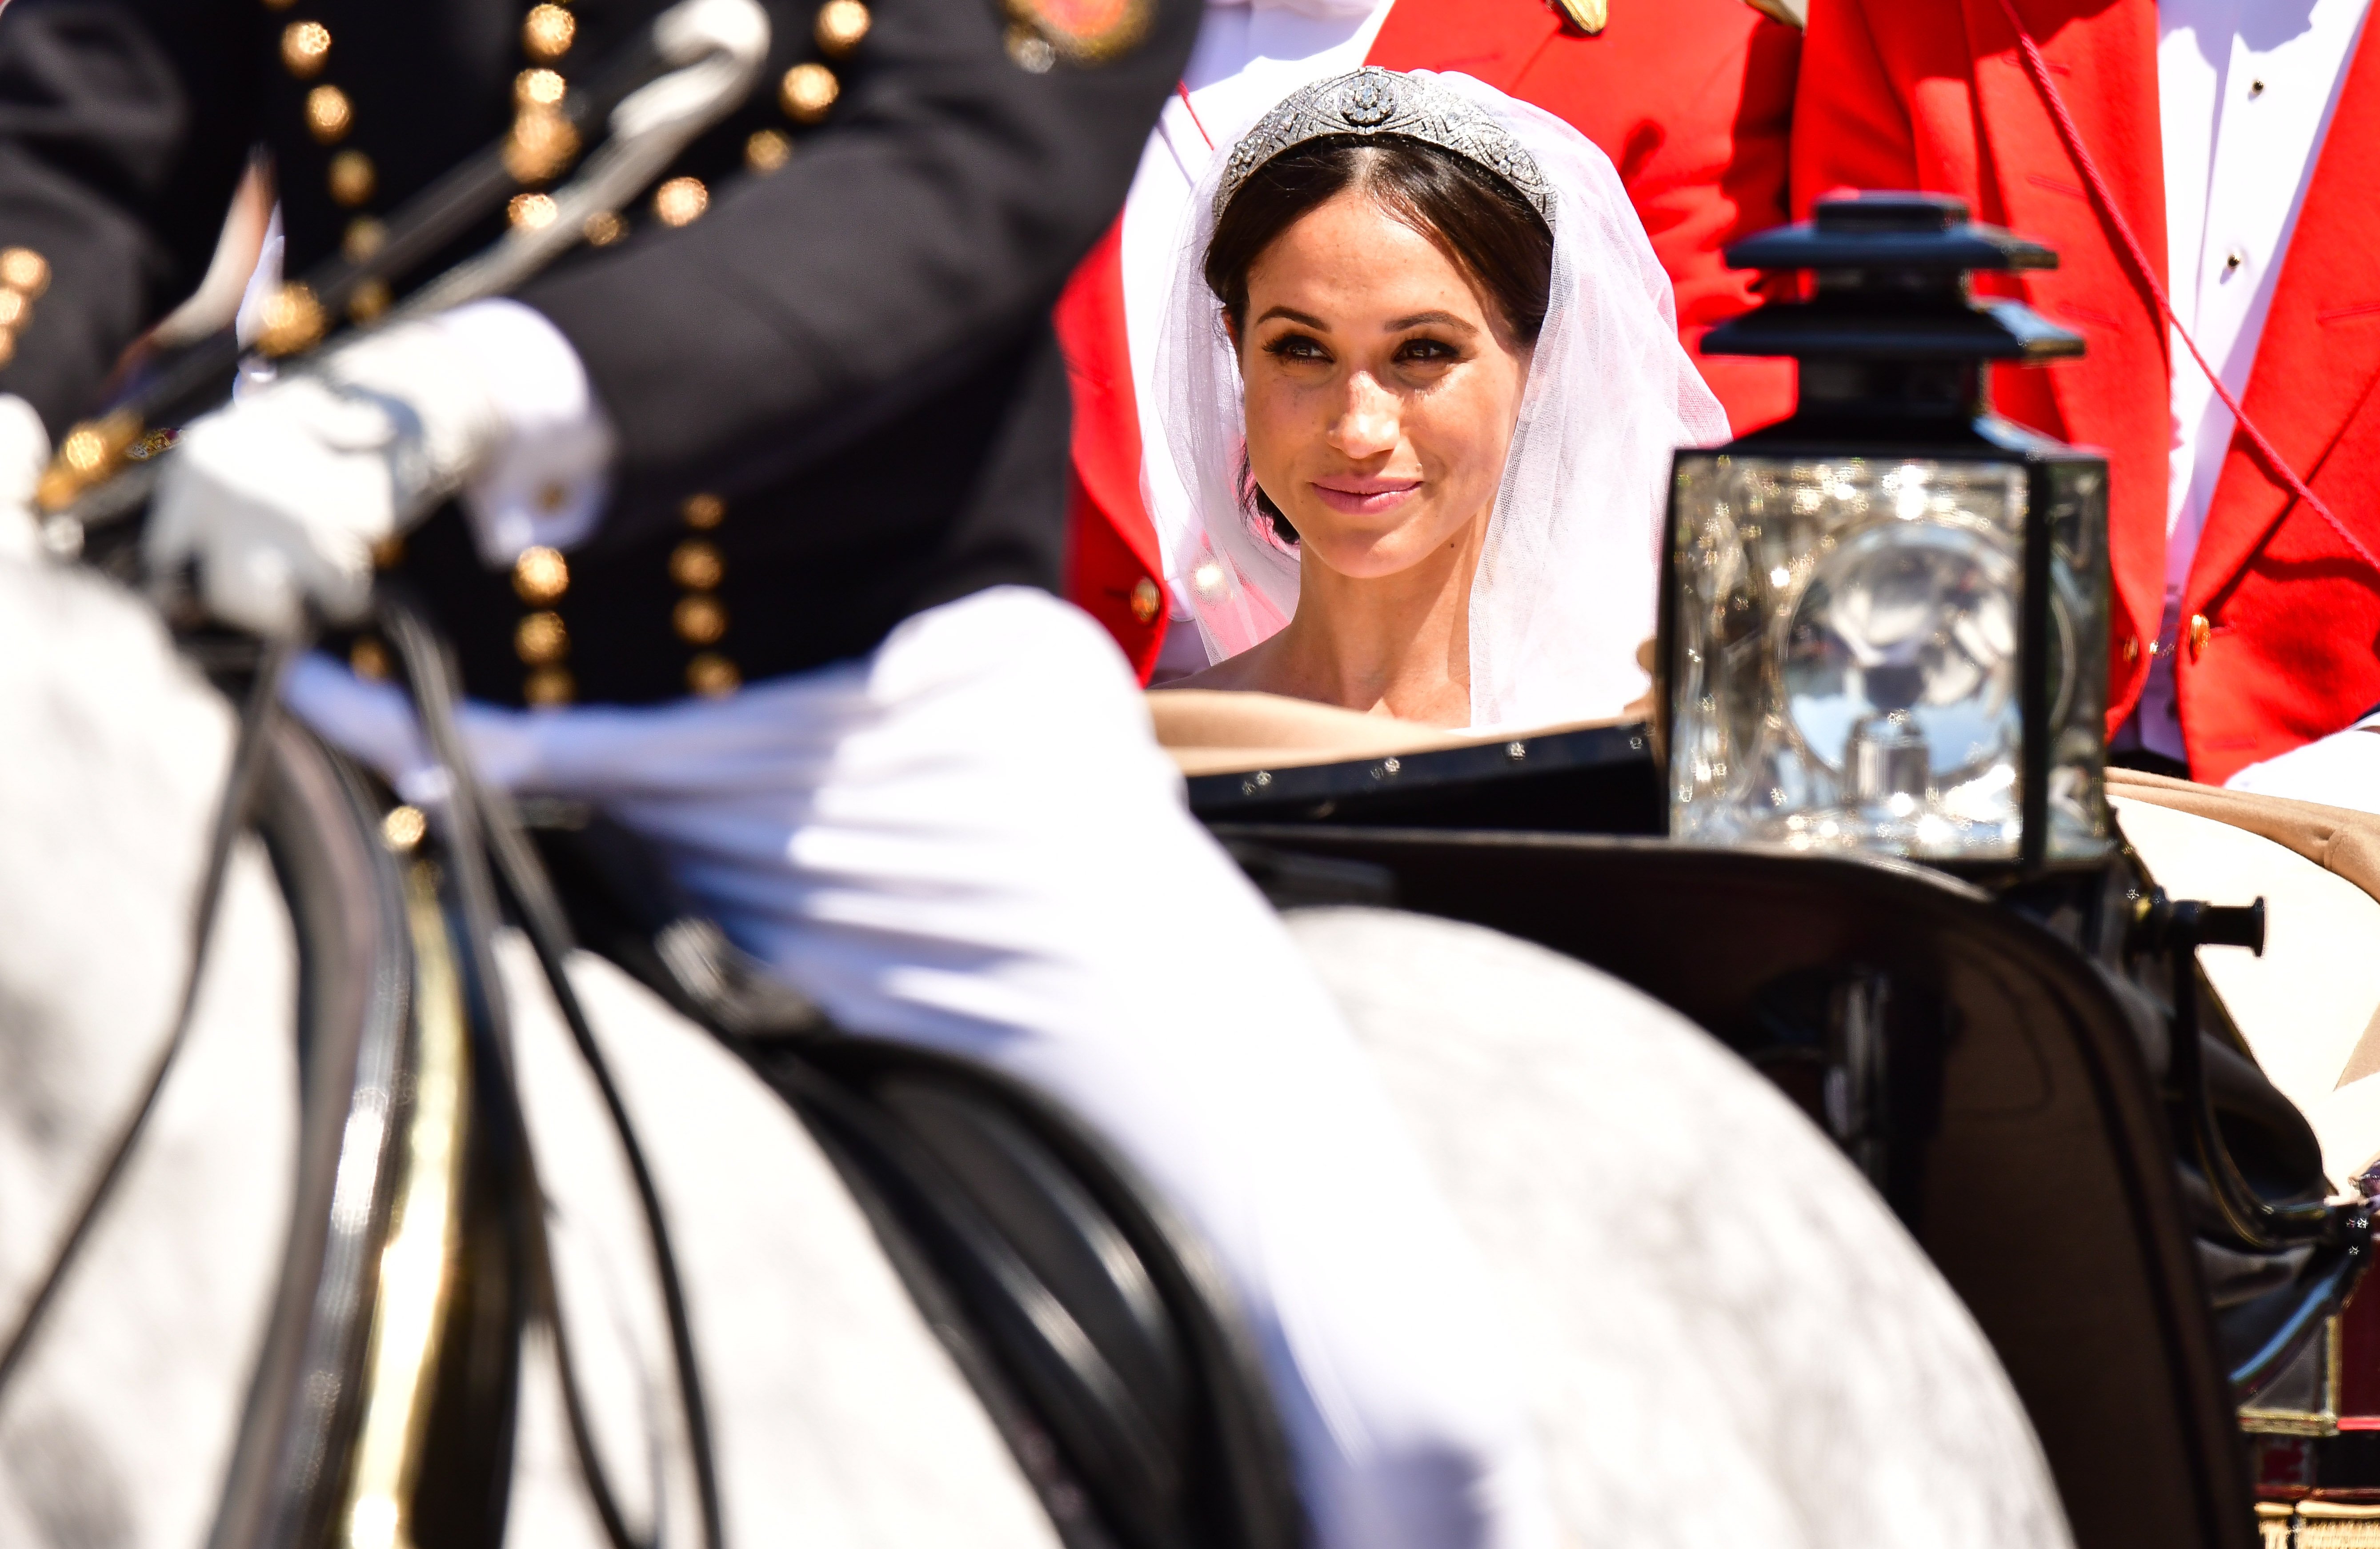 Meghan Markle leaves Windsor Castle in the Ascot Landau carriage during the procession after getting married at St George's Chapel, Windsor Castle on May 19, 2018 in Windsor, England | Source: Getty Images